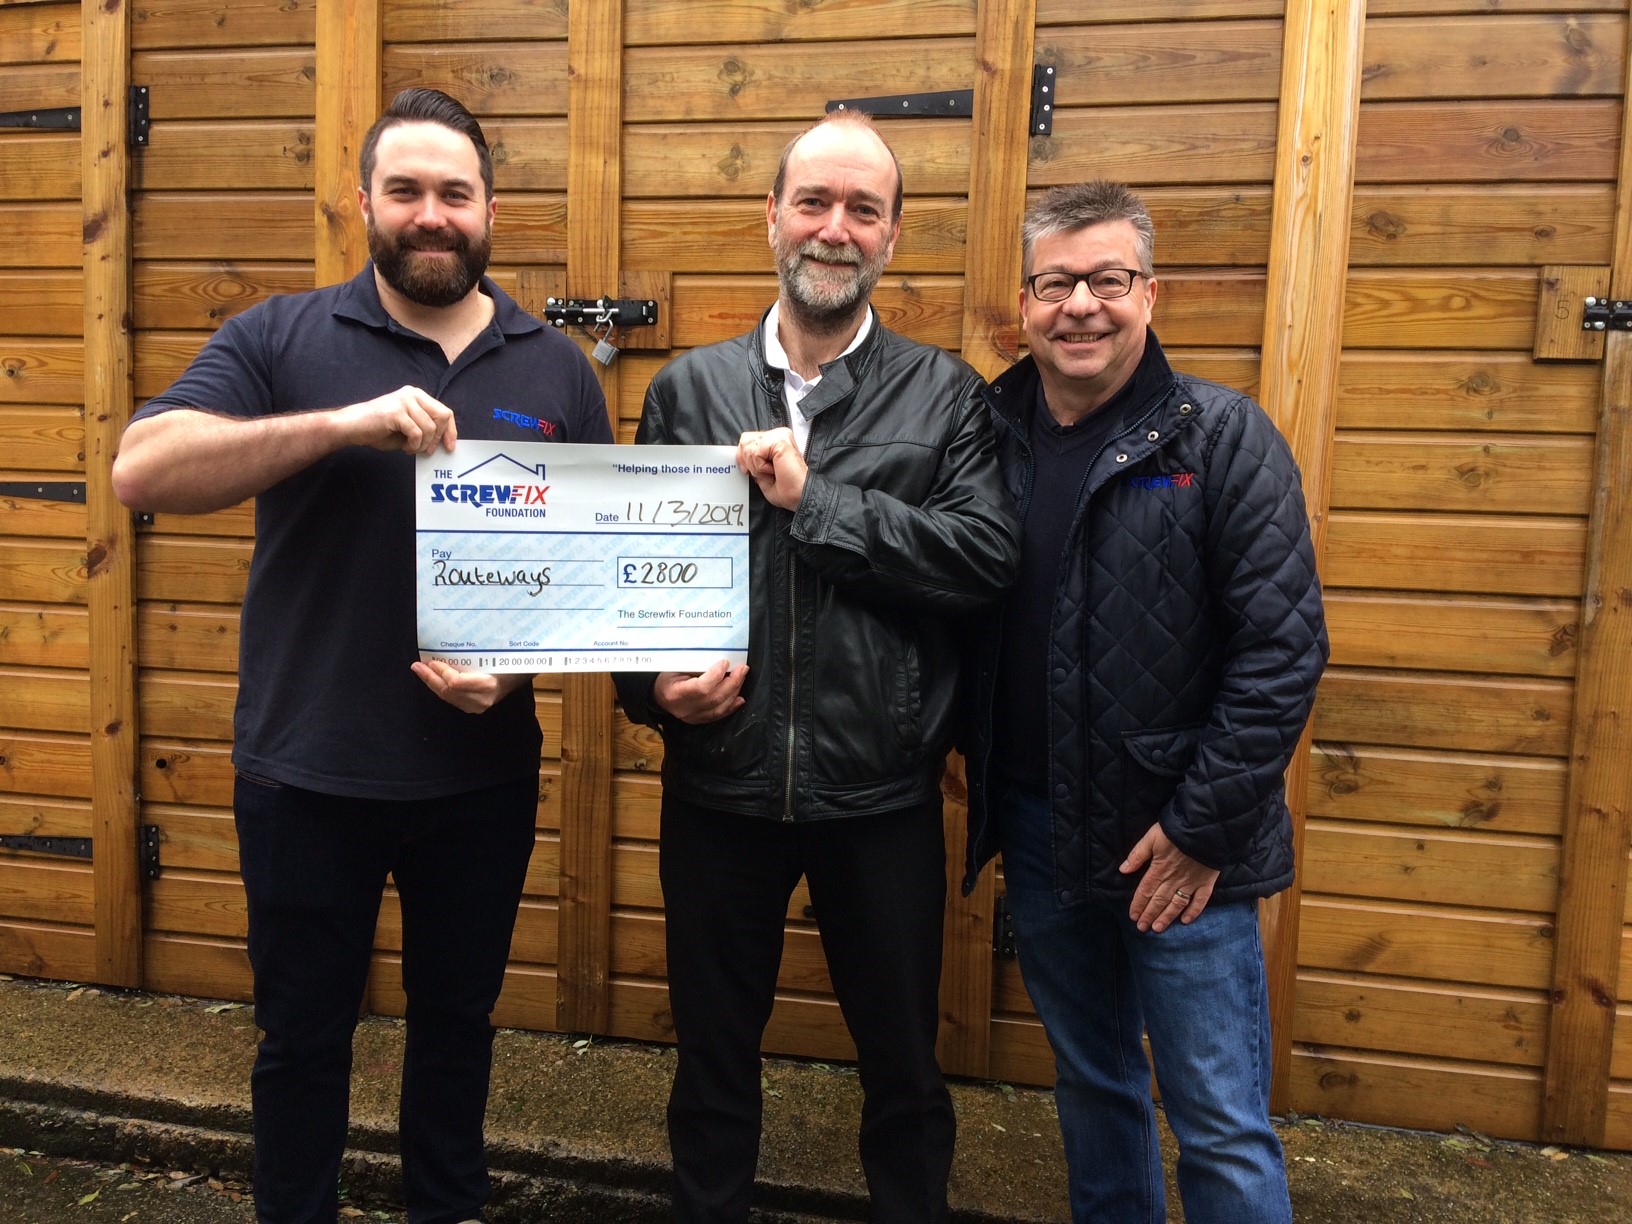 Routeways gets a helping hand from the Screwfix Foundation